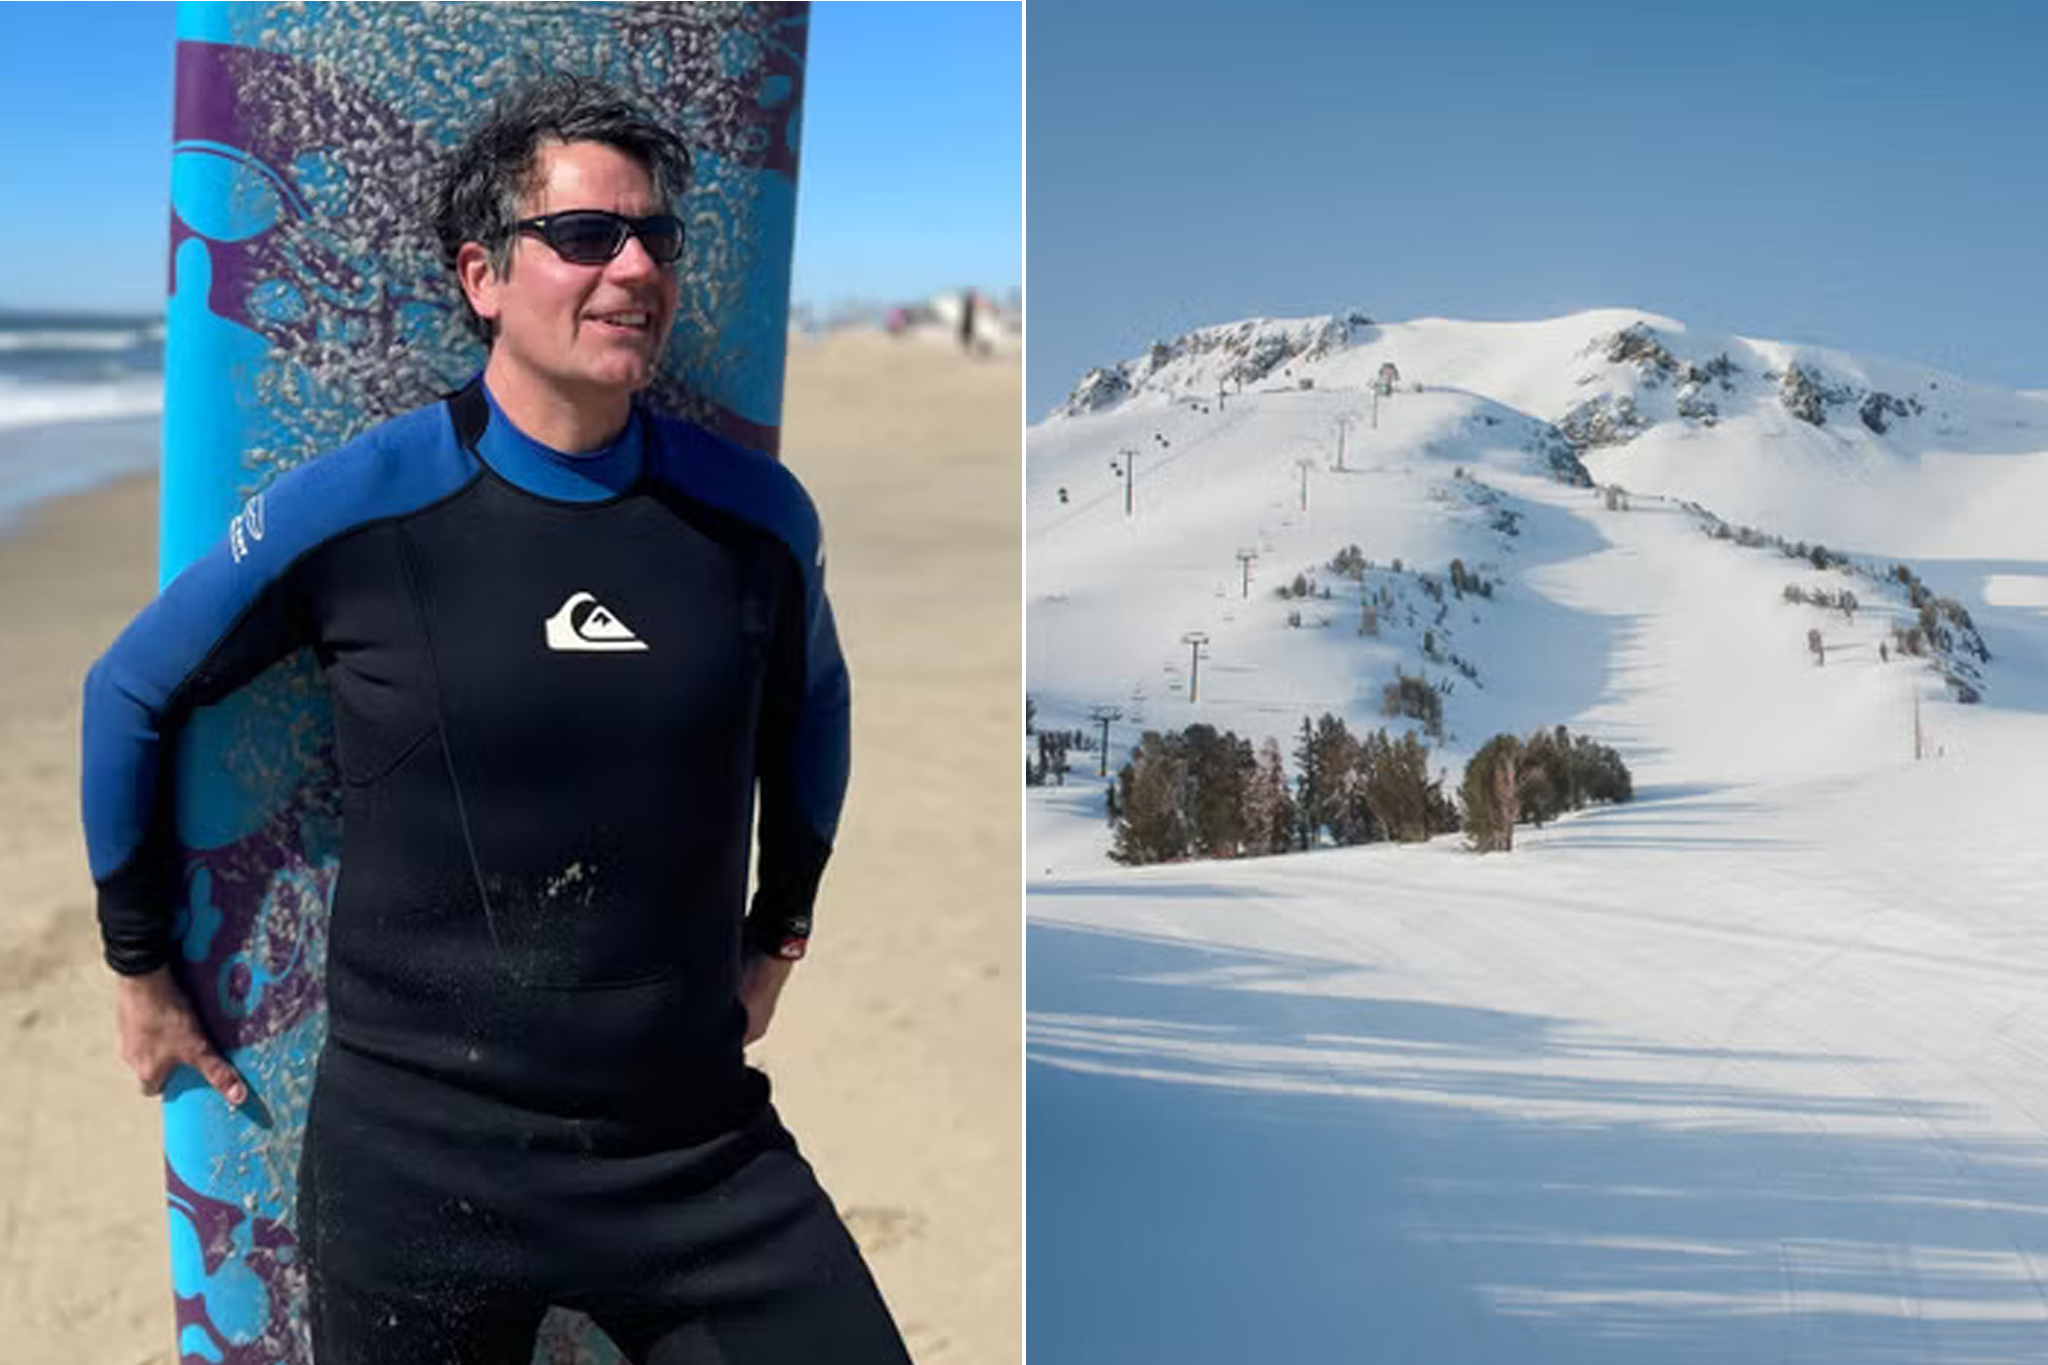 Dominic Bliss hit Huntington Beach and Mammoth Mountain within hours of each other